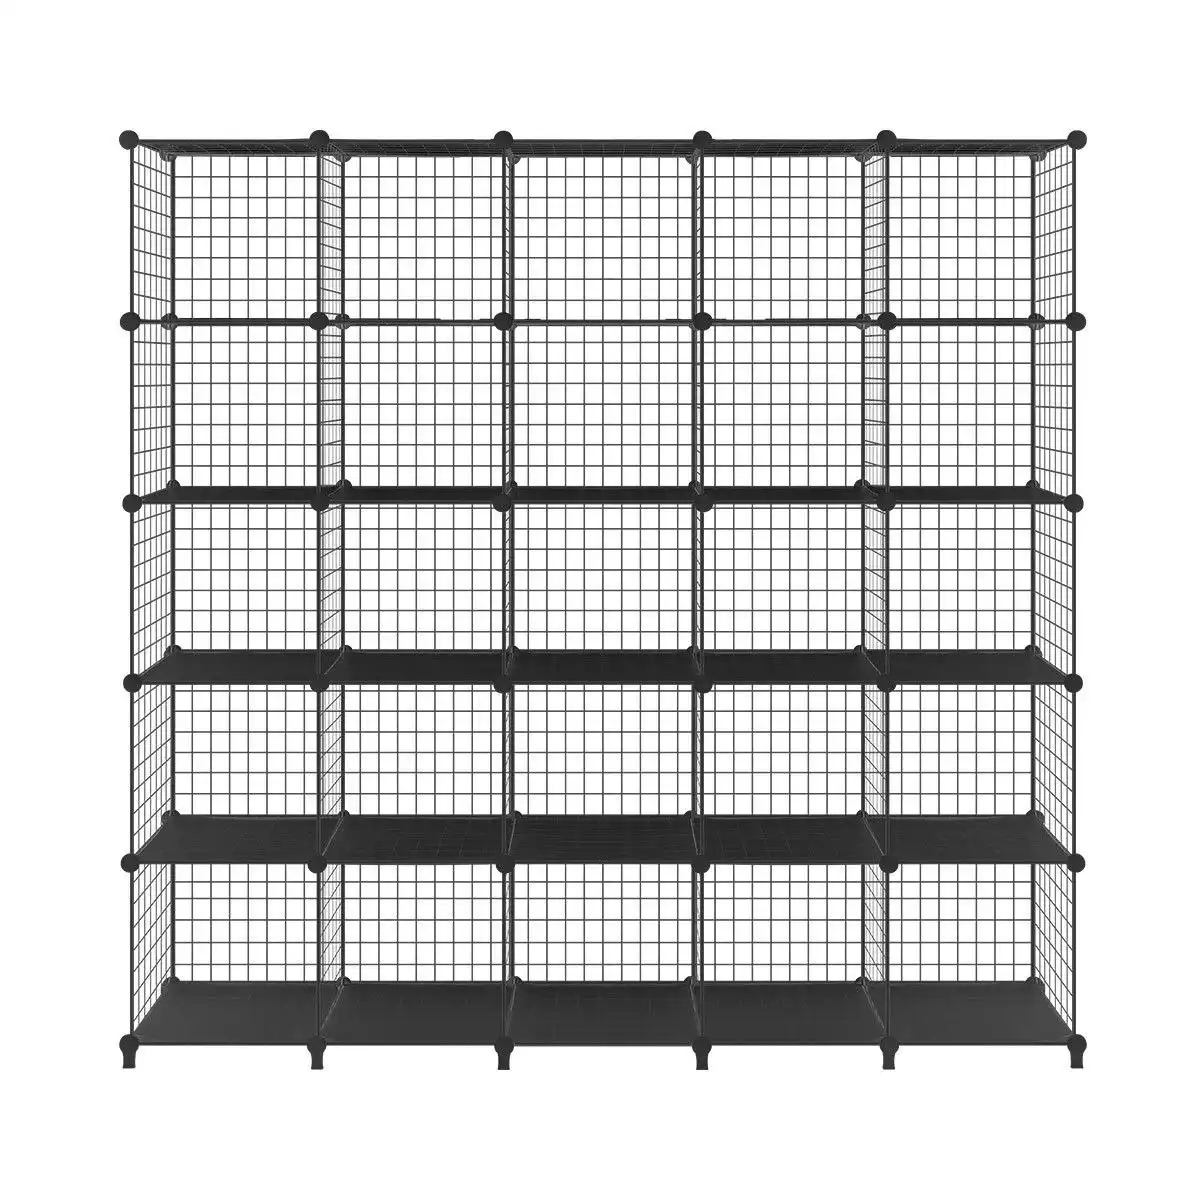 Ausway Metal Wire 25-Cube Storage Grid Organizer DIY Modular Cabinet for Toys Books Clothes Black